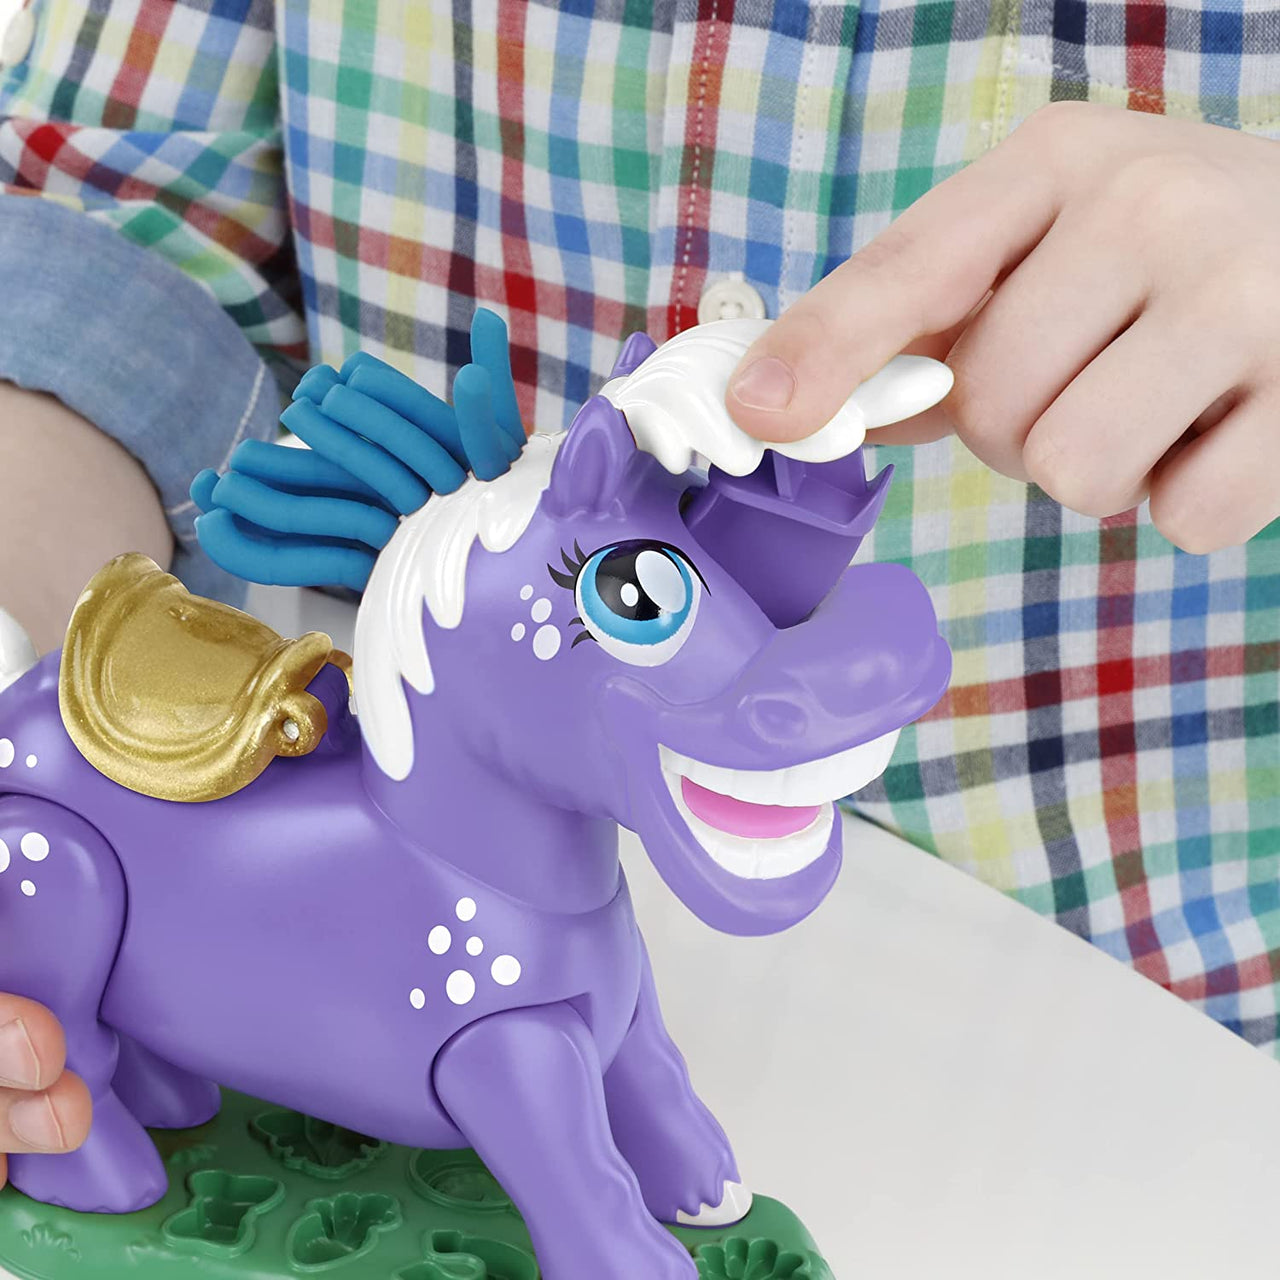 Play Dough Naybelle Show Pony